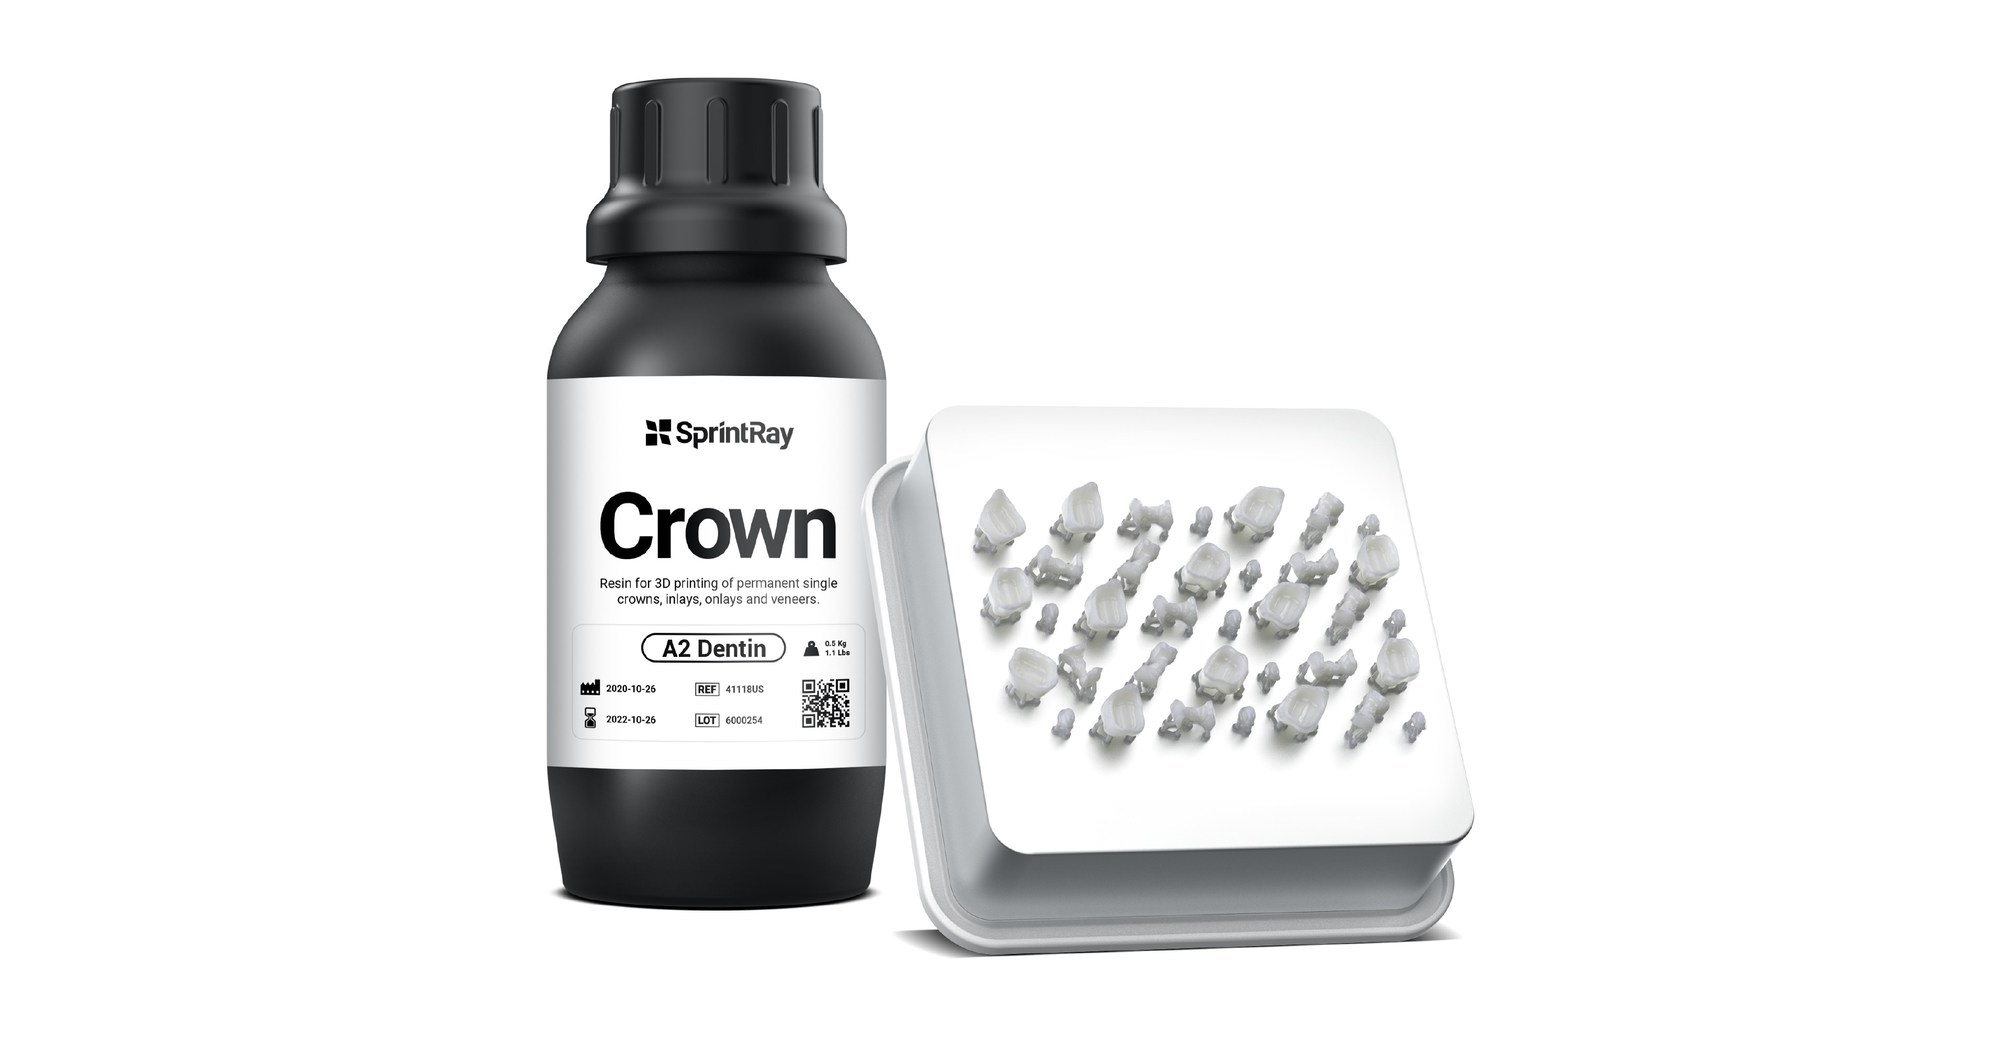 The new SprintRay Crown™ for permanent restorations takes dental 3D printing to next level